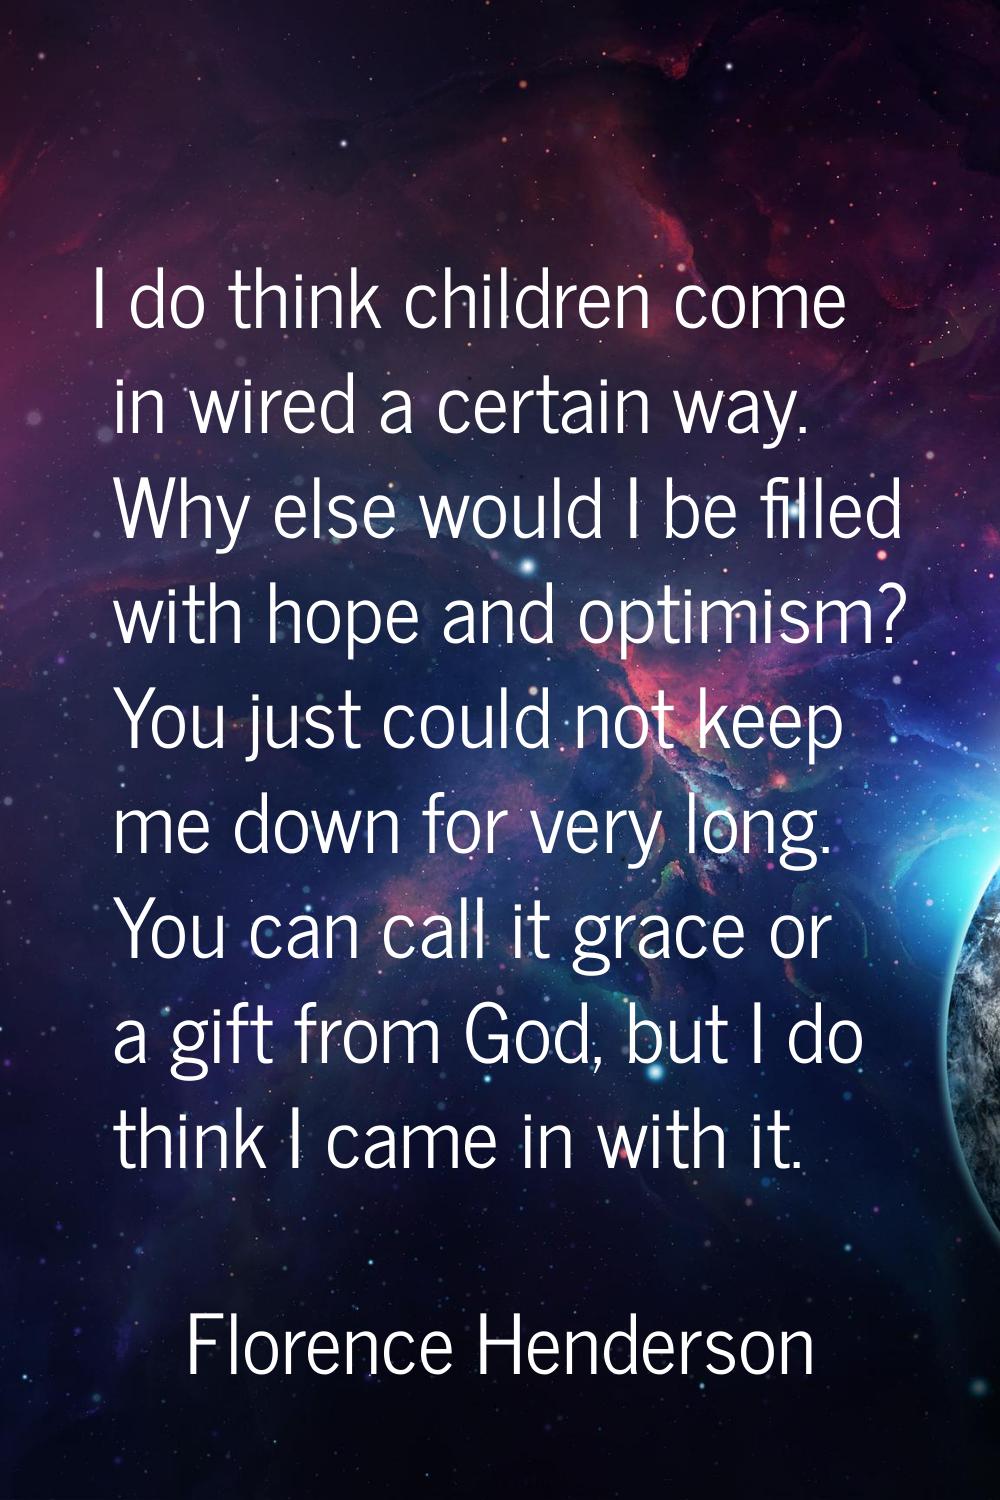 I do think children come in wired a certain way. Why else would I be filled with hope and optimism?